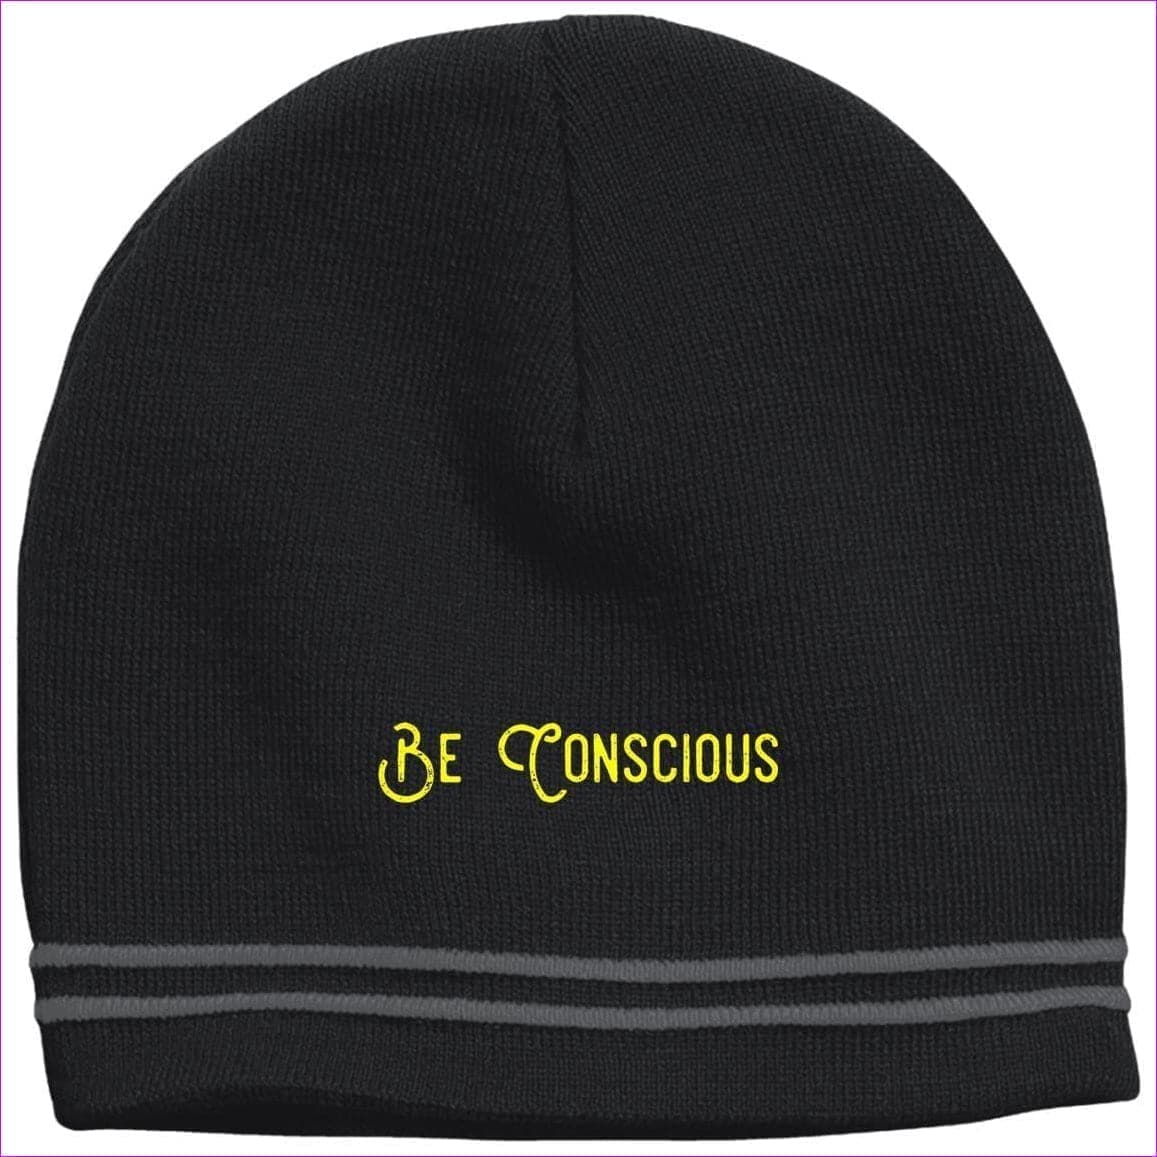 STC20 Colorblock Beanie Black Iron Grey One Size - Be Conscious Embroidered Knit Cap, Cap, Beanie - Beanie at TFC&H Co.